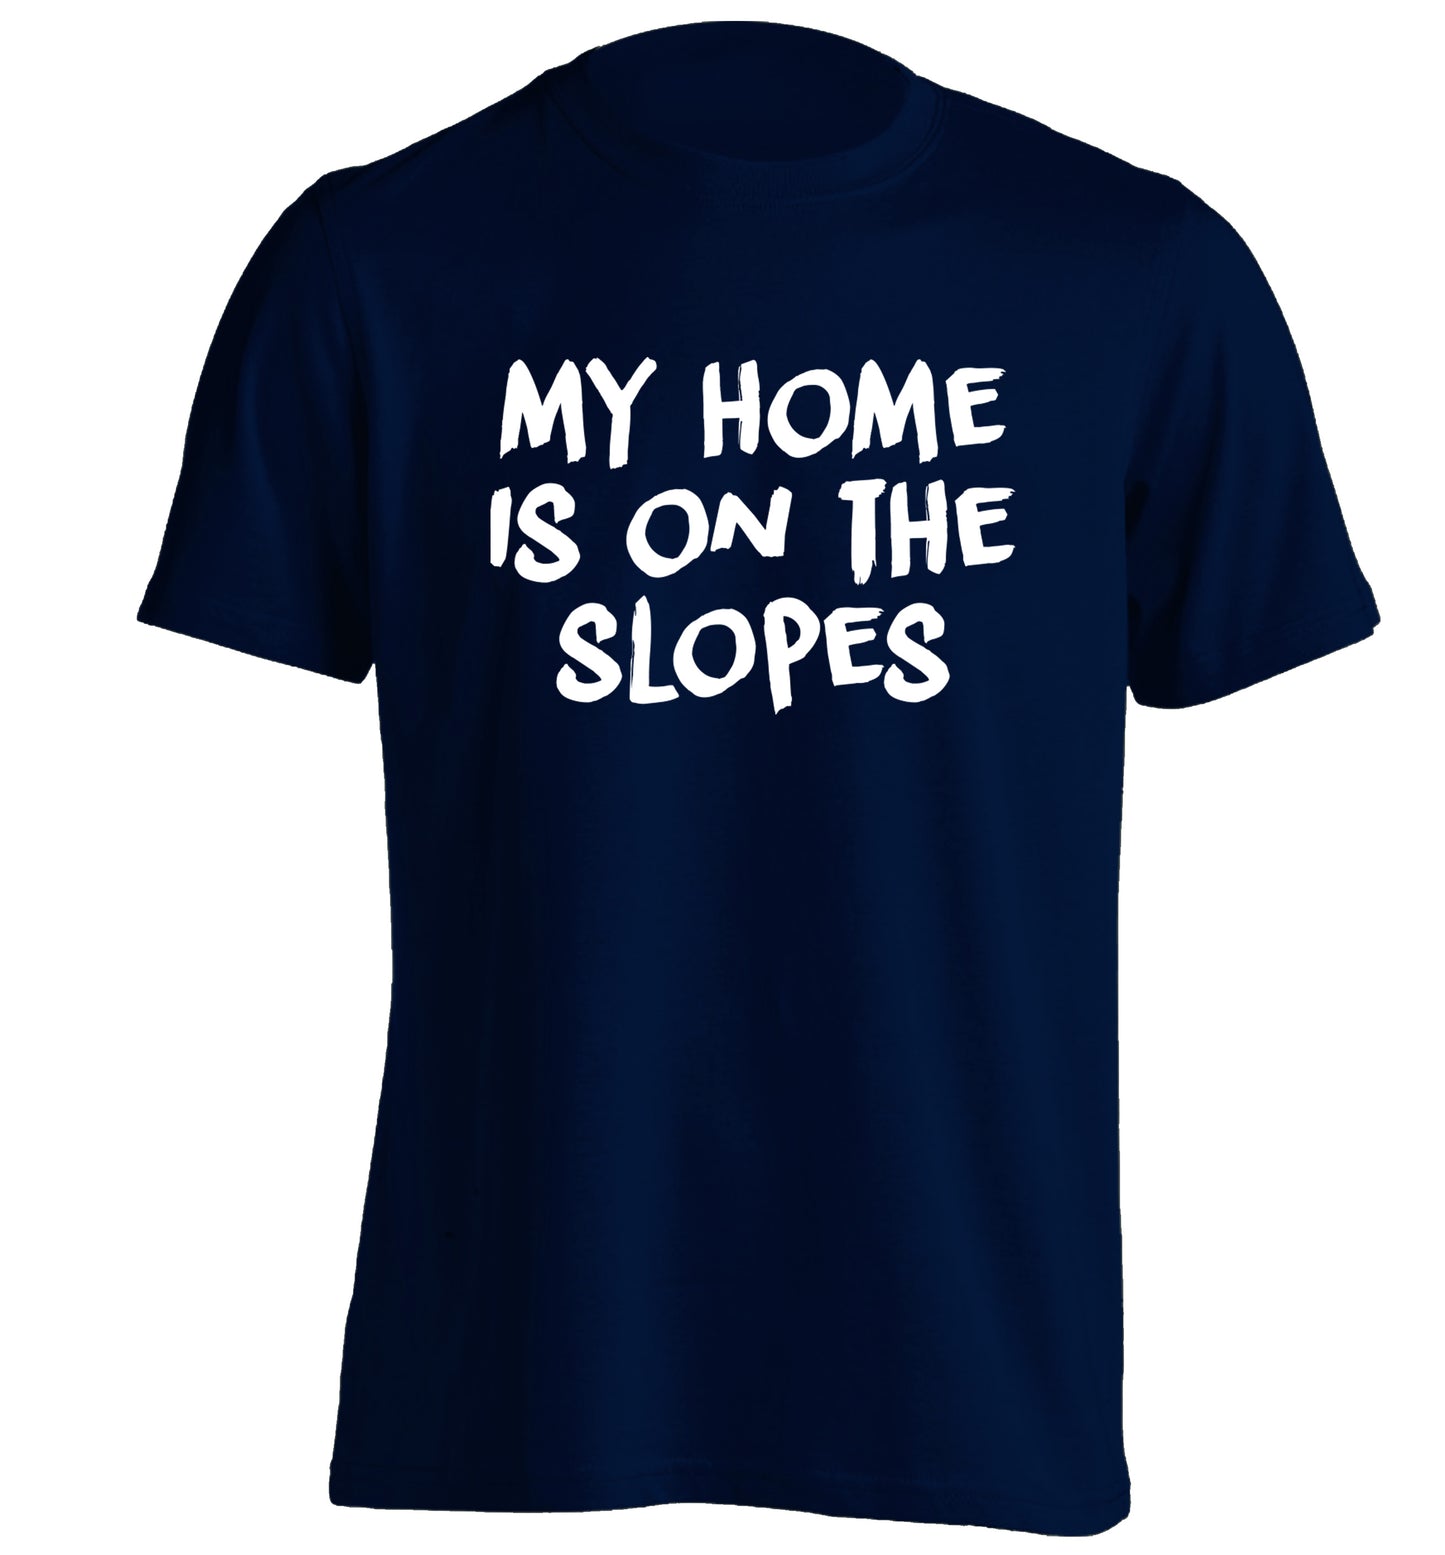 My home is on the slopes adults unisexnavy Tshirt 2XL